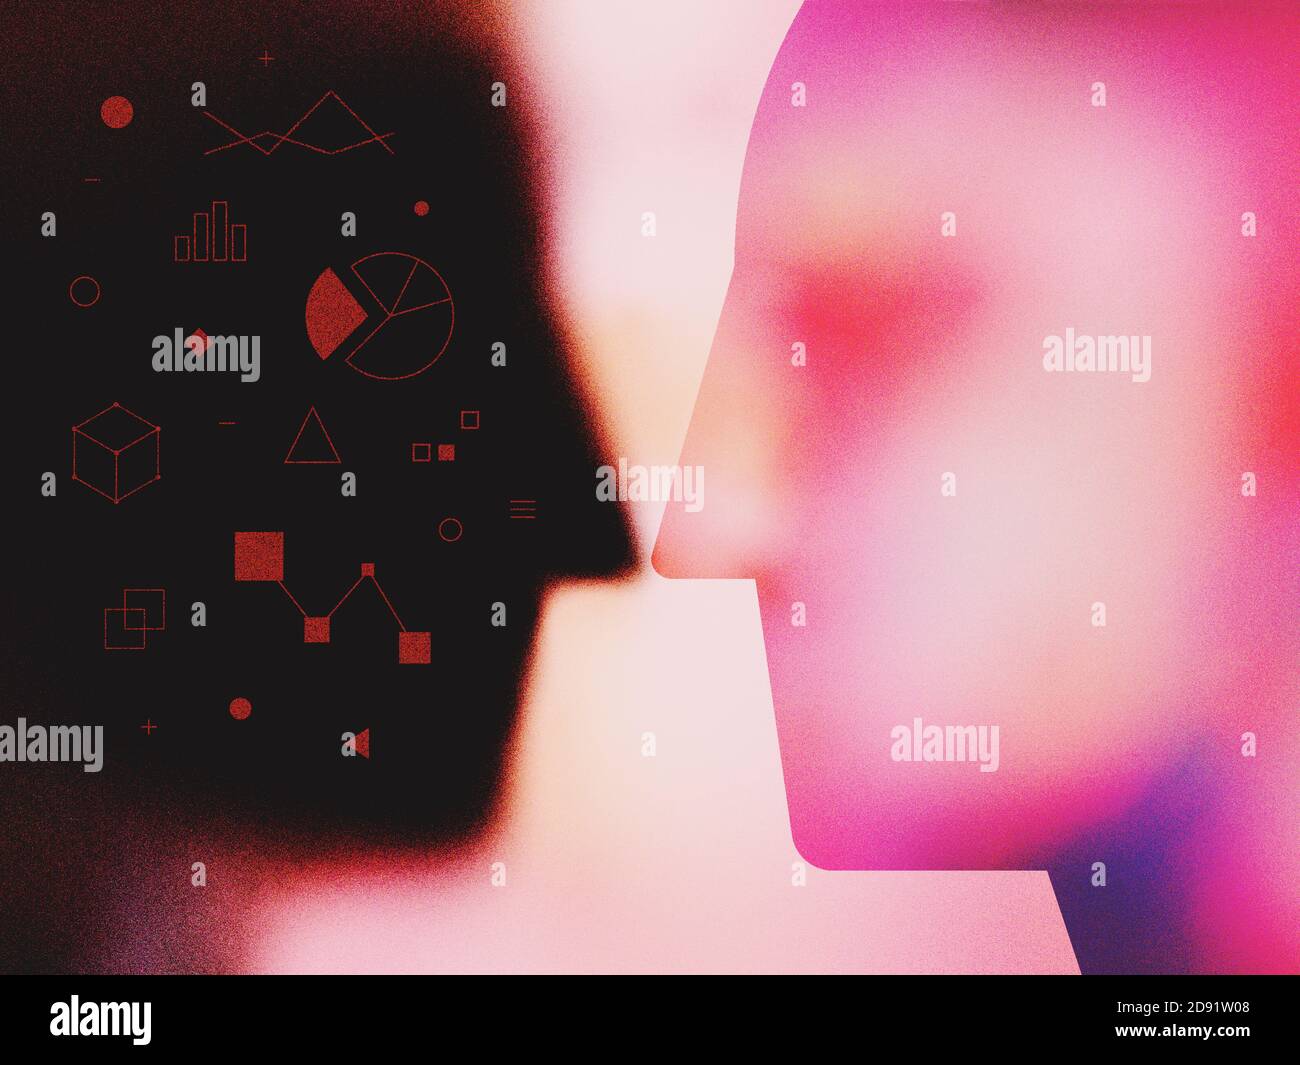 Modern textured digital illustration of abstract human heads and personal data infographics. Concept of collecting internet activities information. Stock Photo